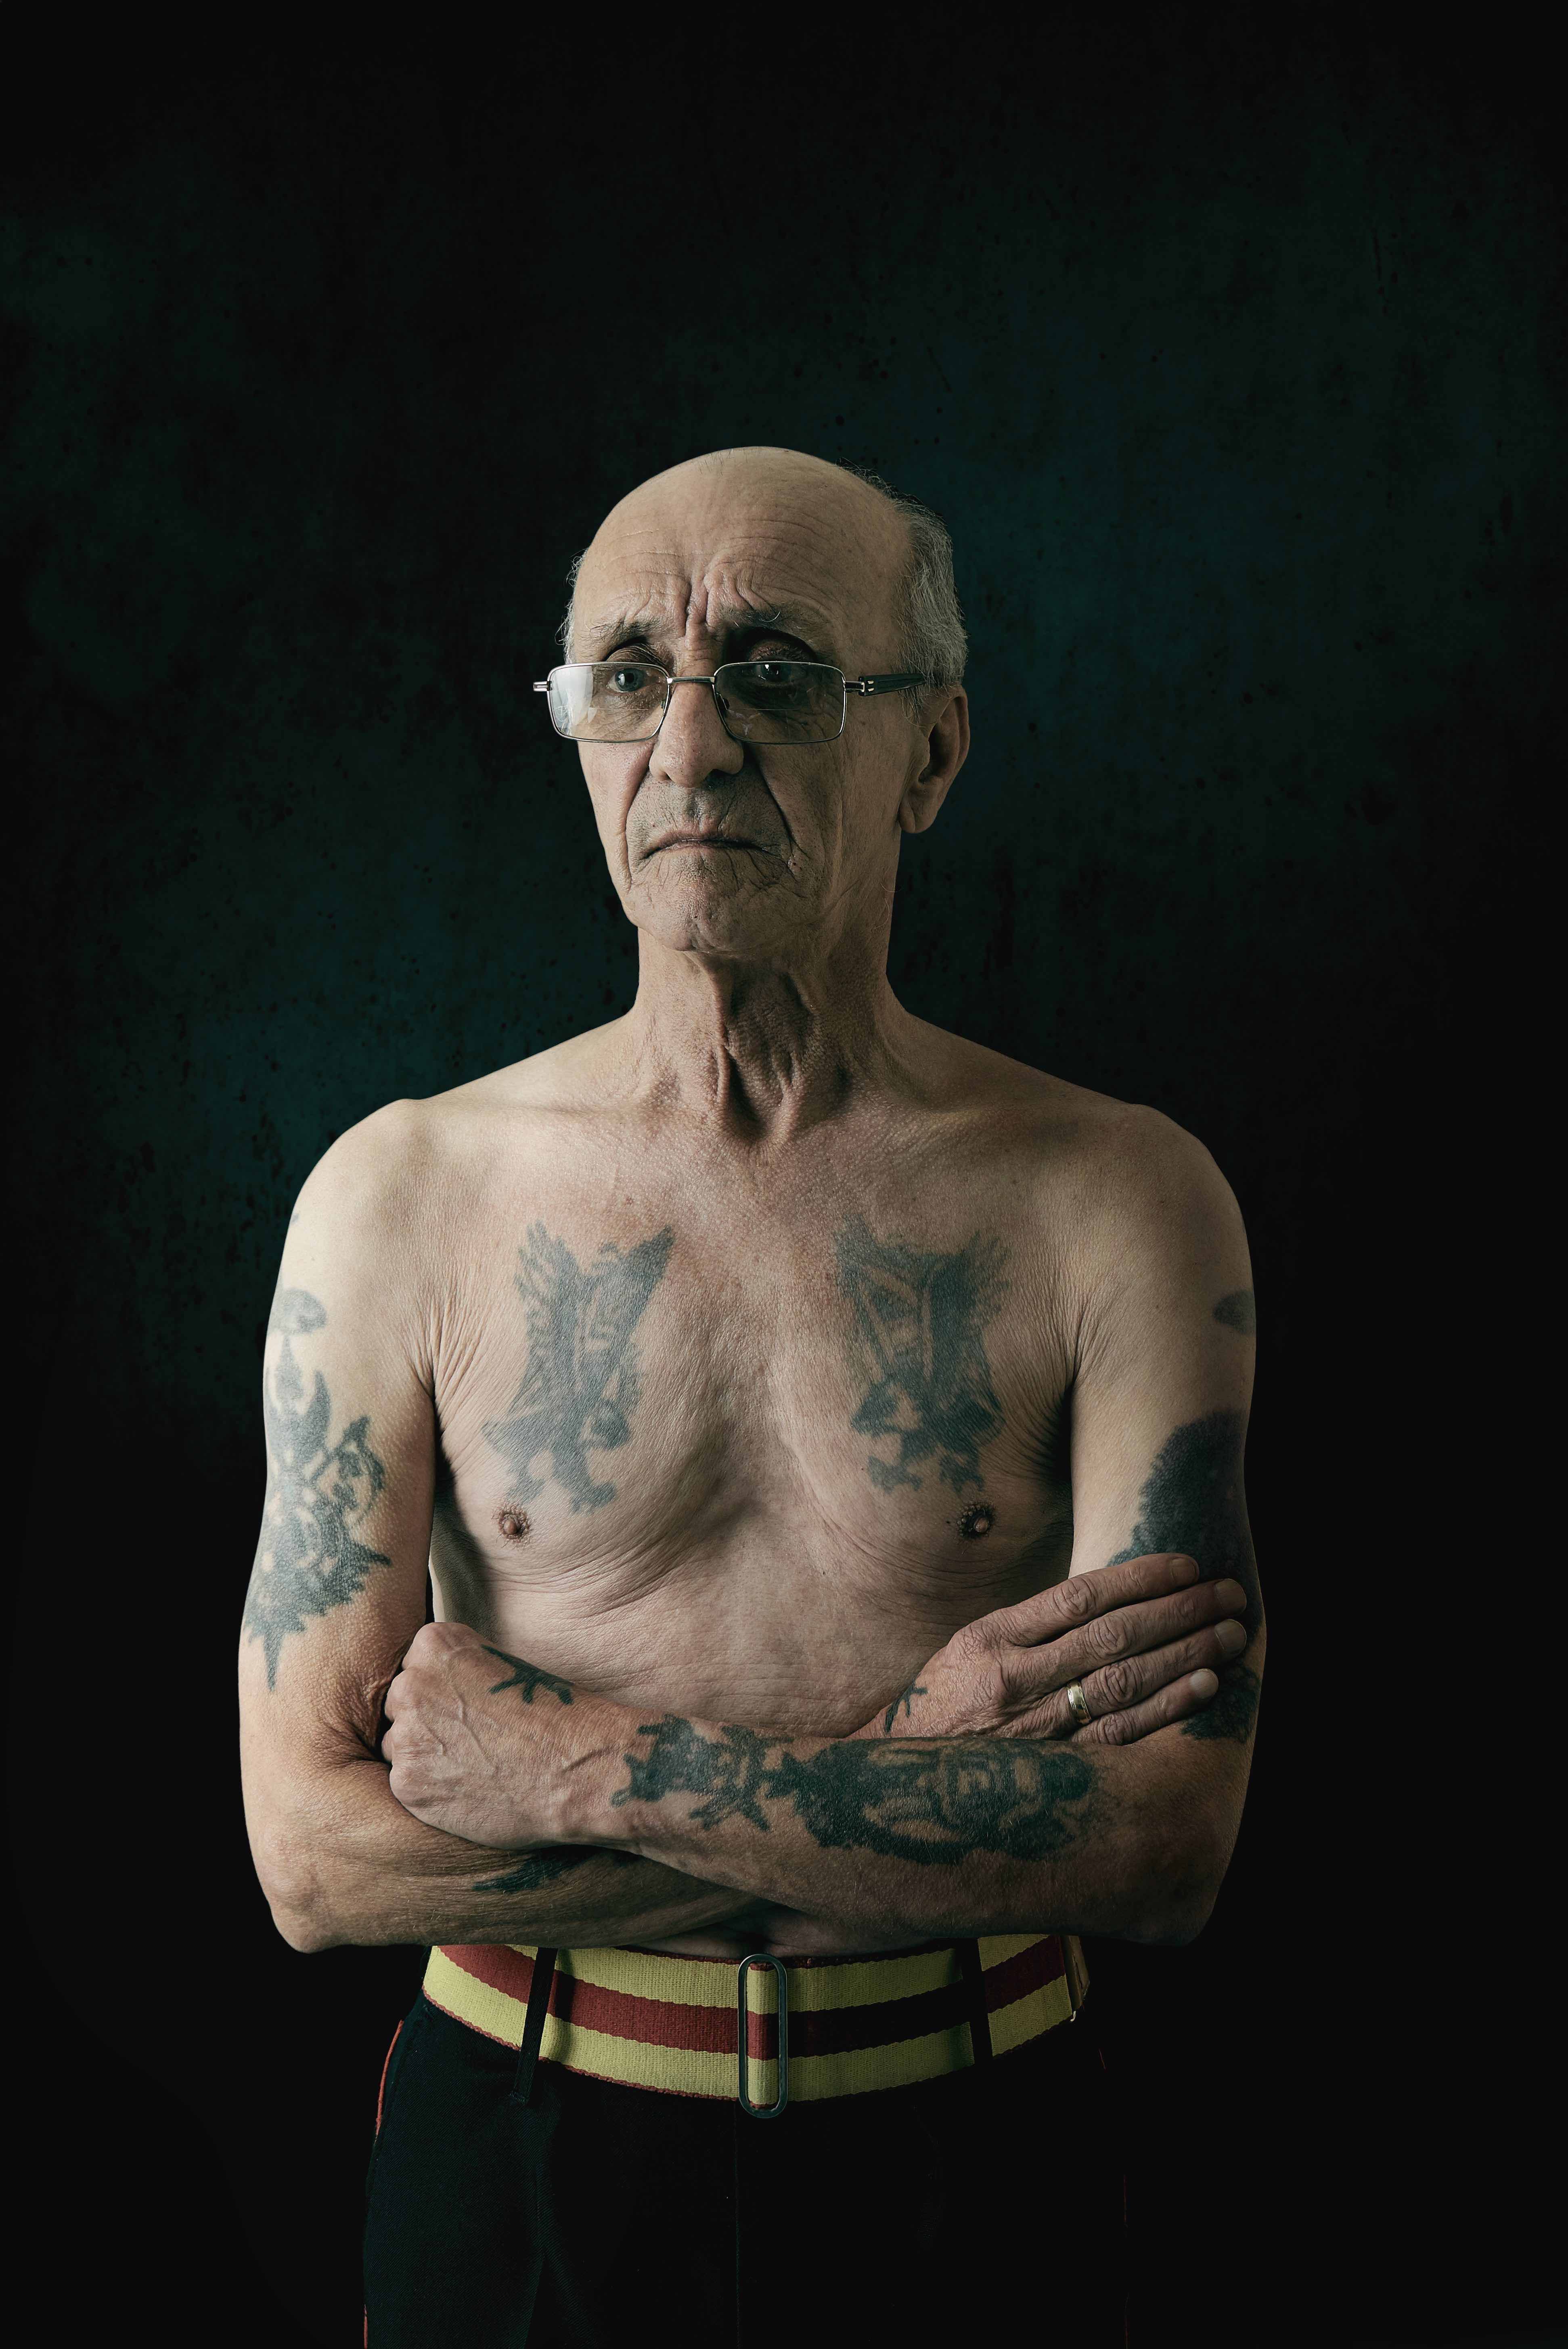 Royal British Legion Tribute Ink Tattoo Exhibition Opens  The British  Army